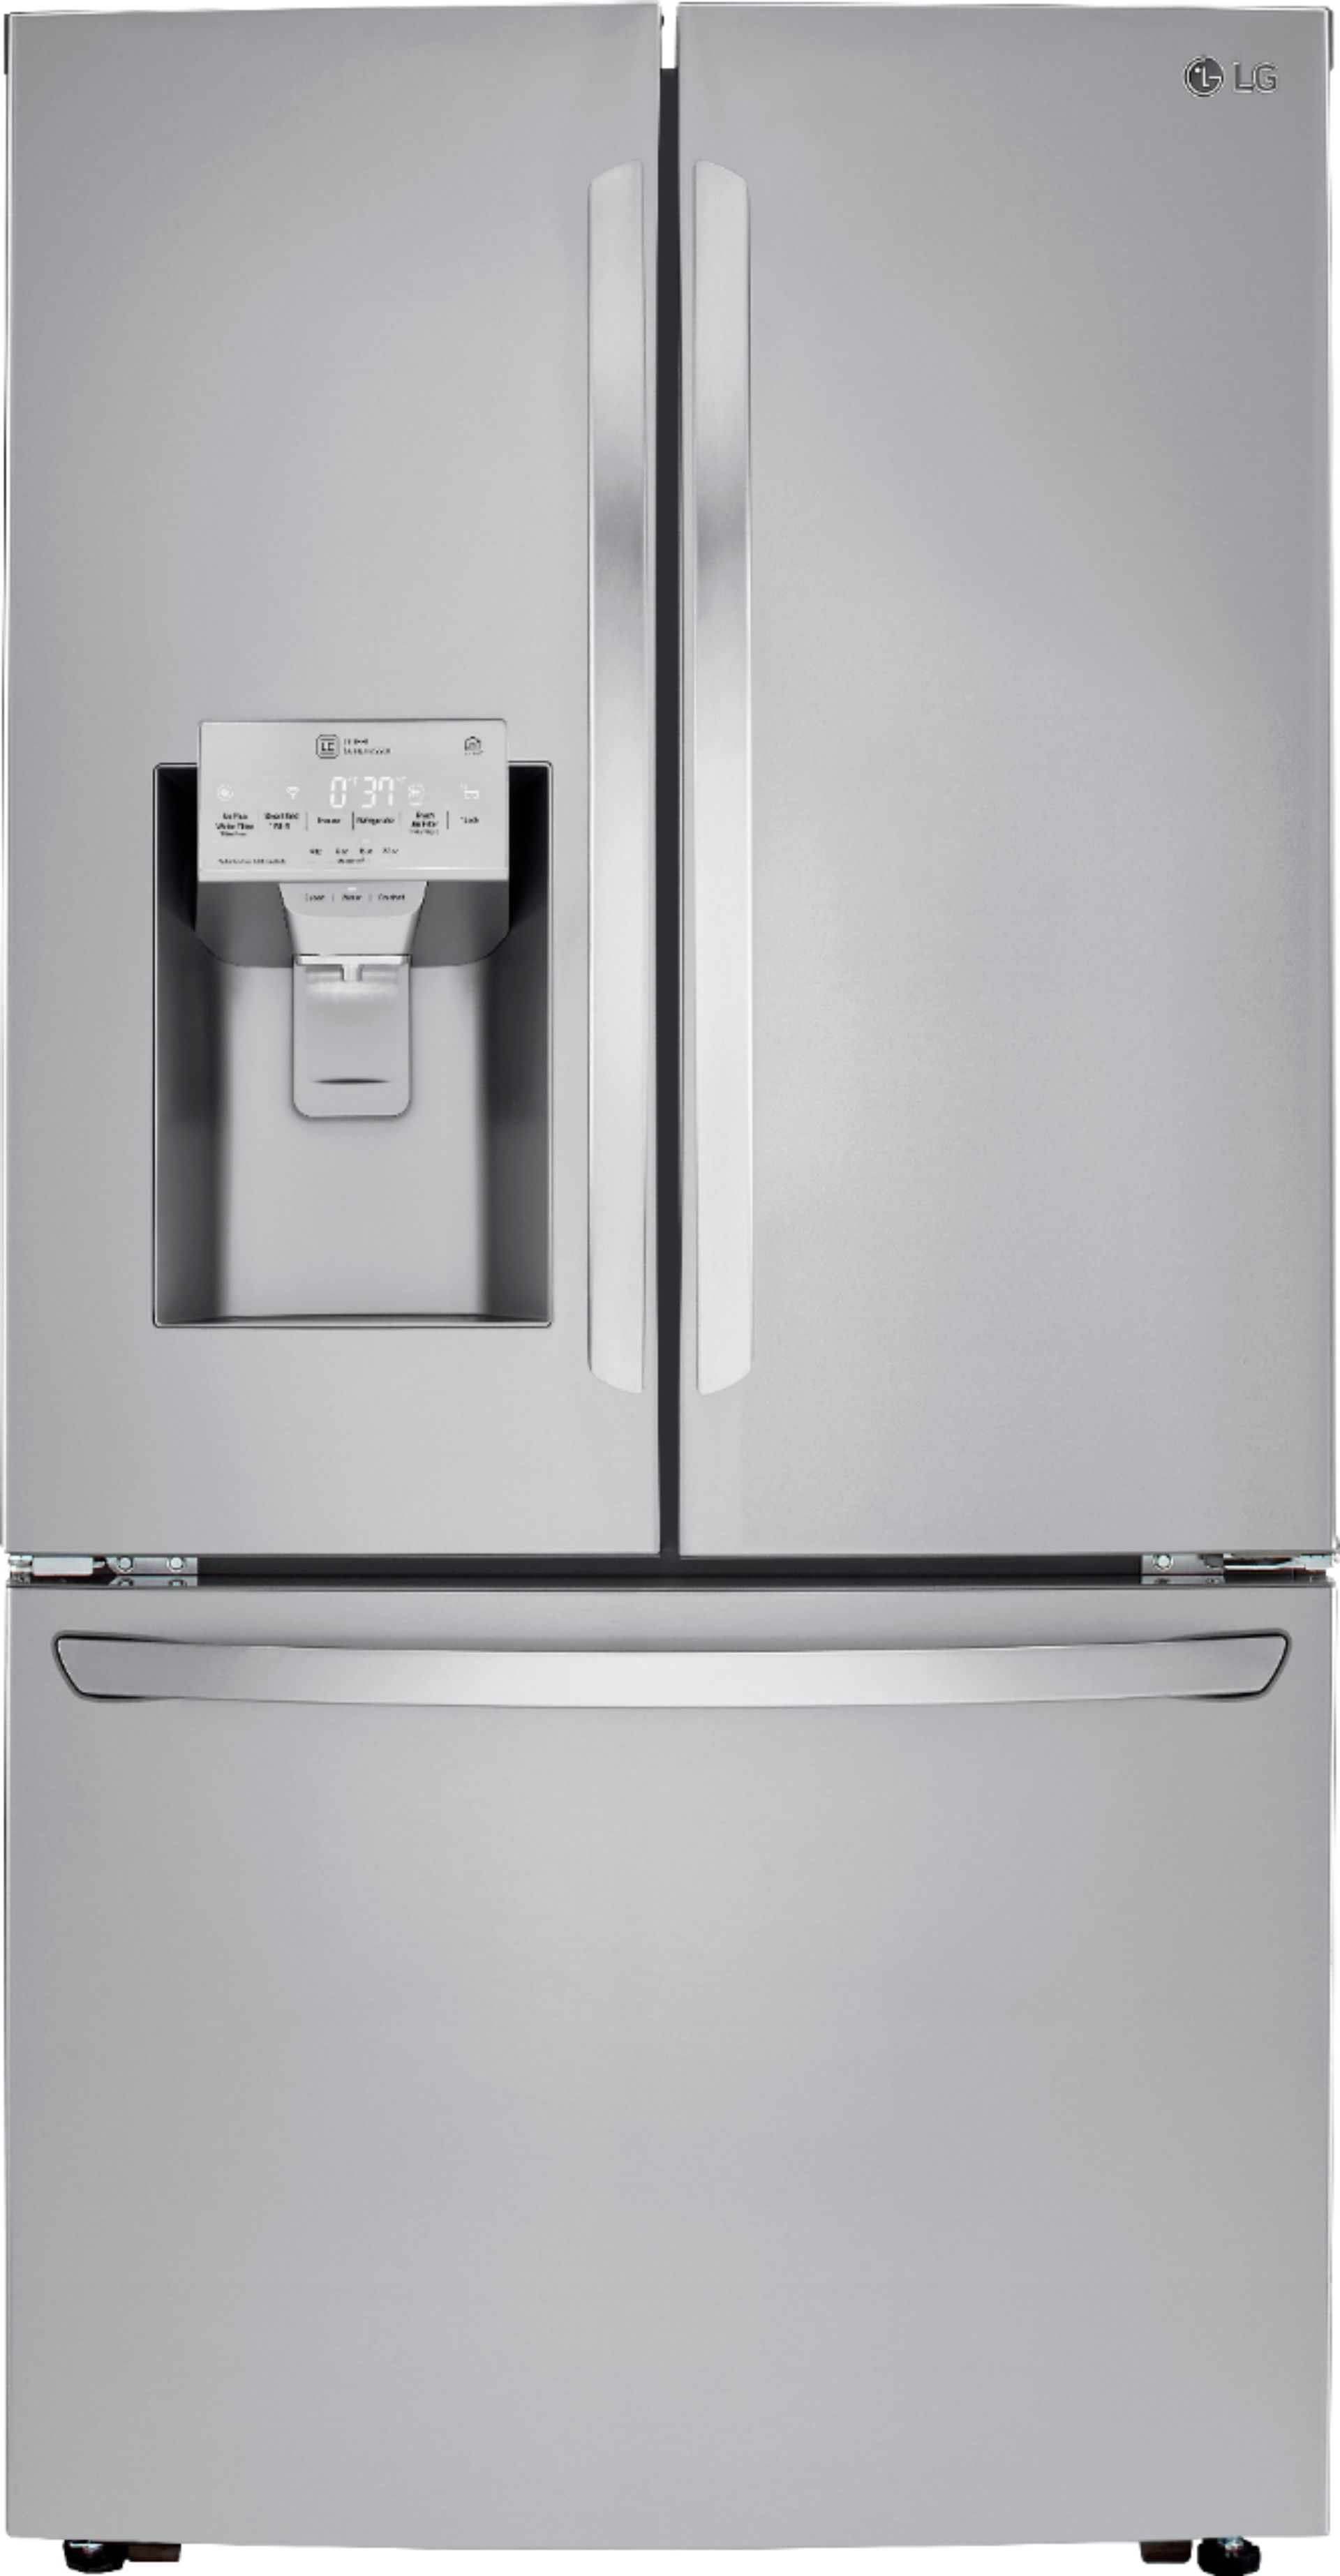 Lg 23 5 Cu Ft French Door Counter Depth Refrigerator Stainless